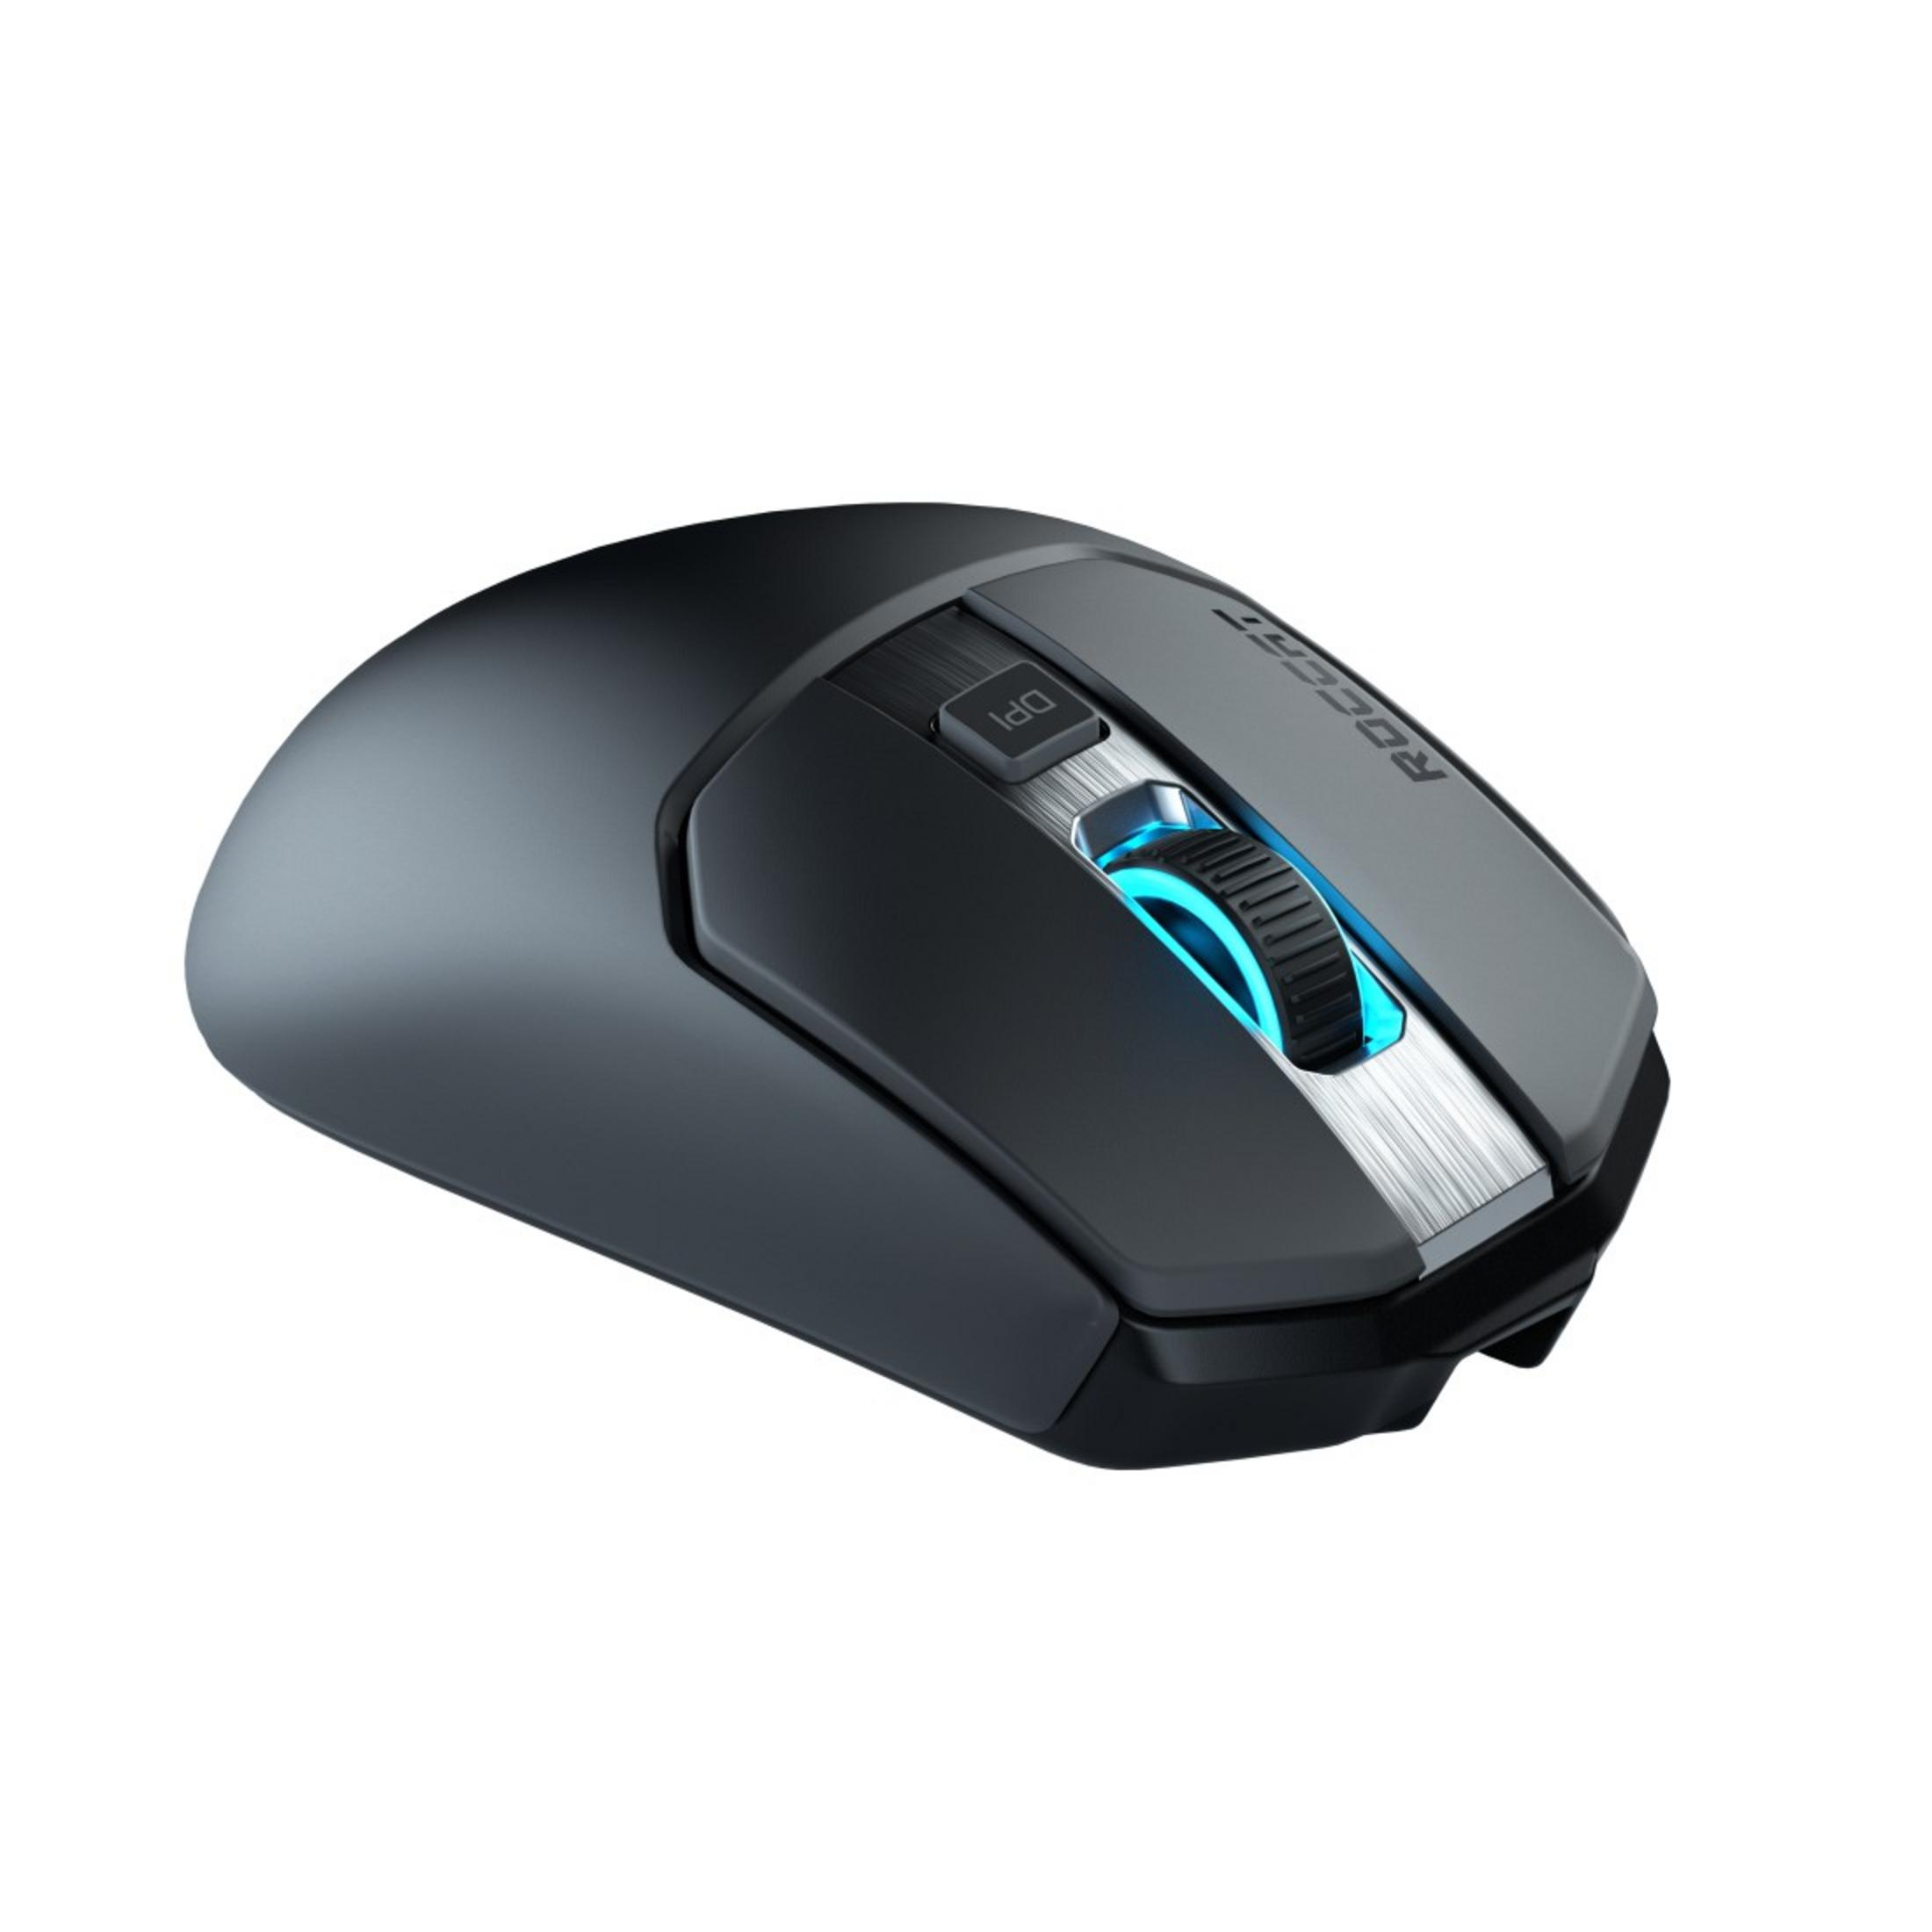 ROCCAT ROC-11-615-BK KAIN Schwarz MOUSE Maus, 200 Gaming AIMO GAMING